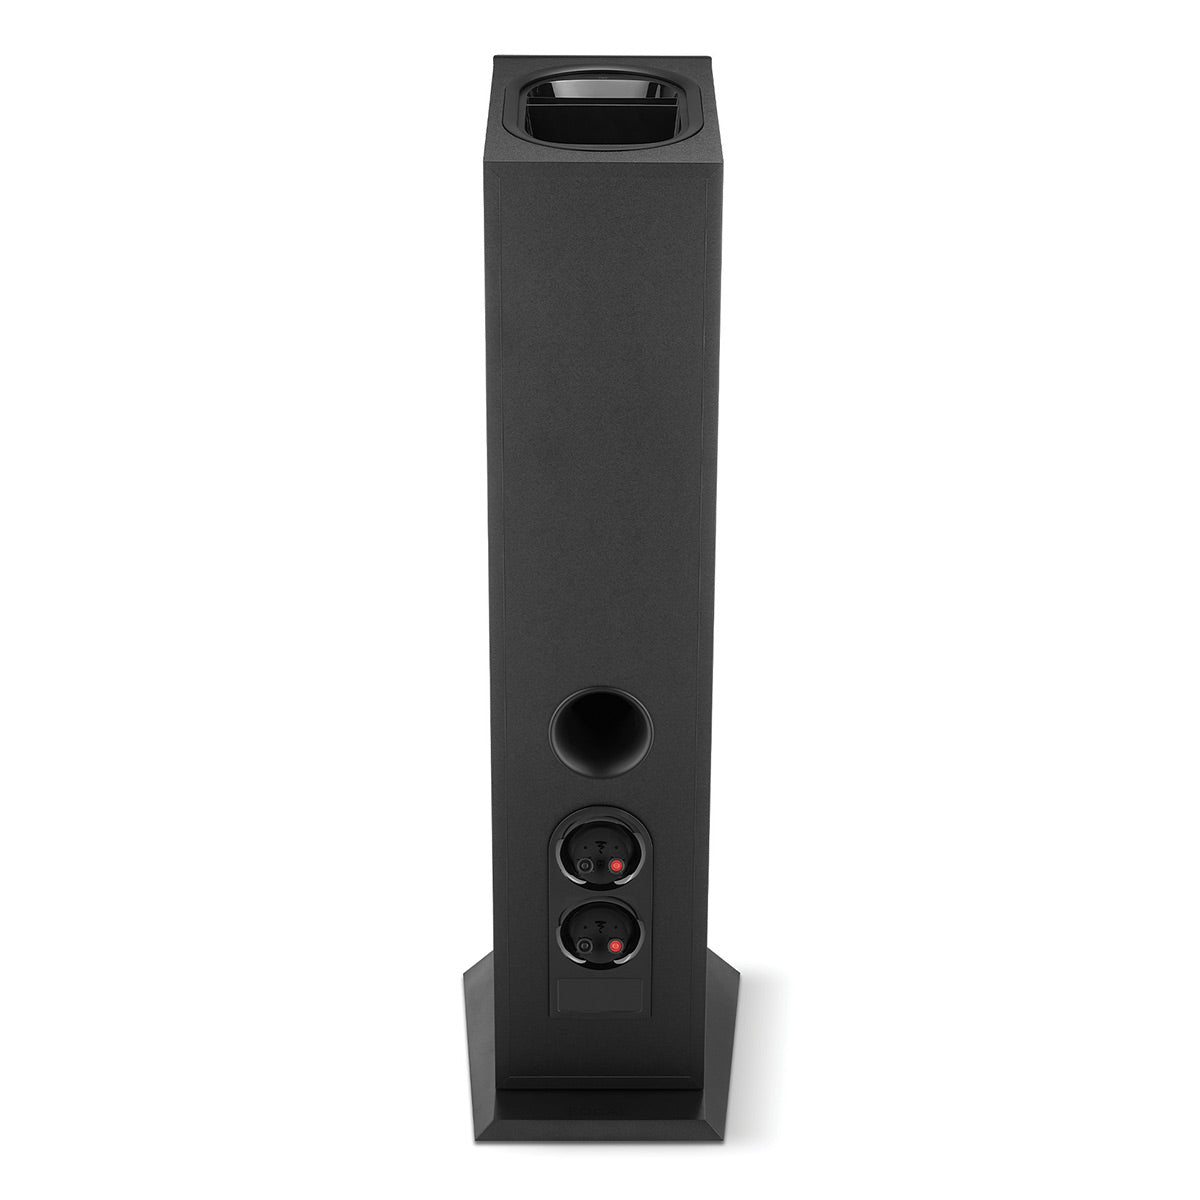 Focal Theva No.3-D 3-Way Bass-Reflex Floorstanding Loudspeaker with 5" Full-Range Up-Firing Driver for Dolby Atmos Effects - Each (Black)